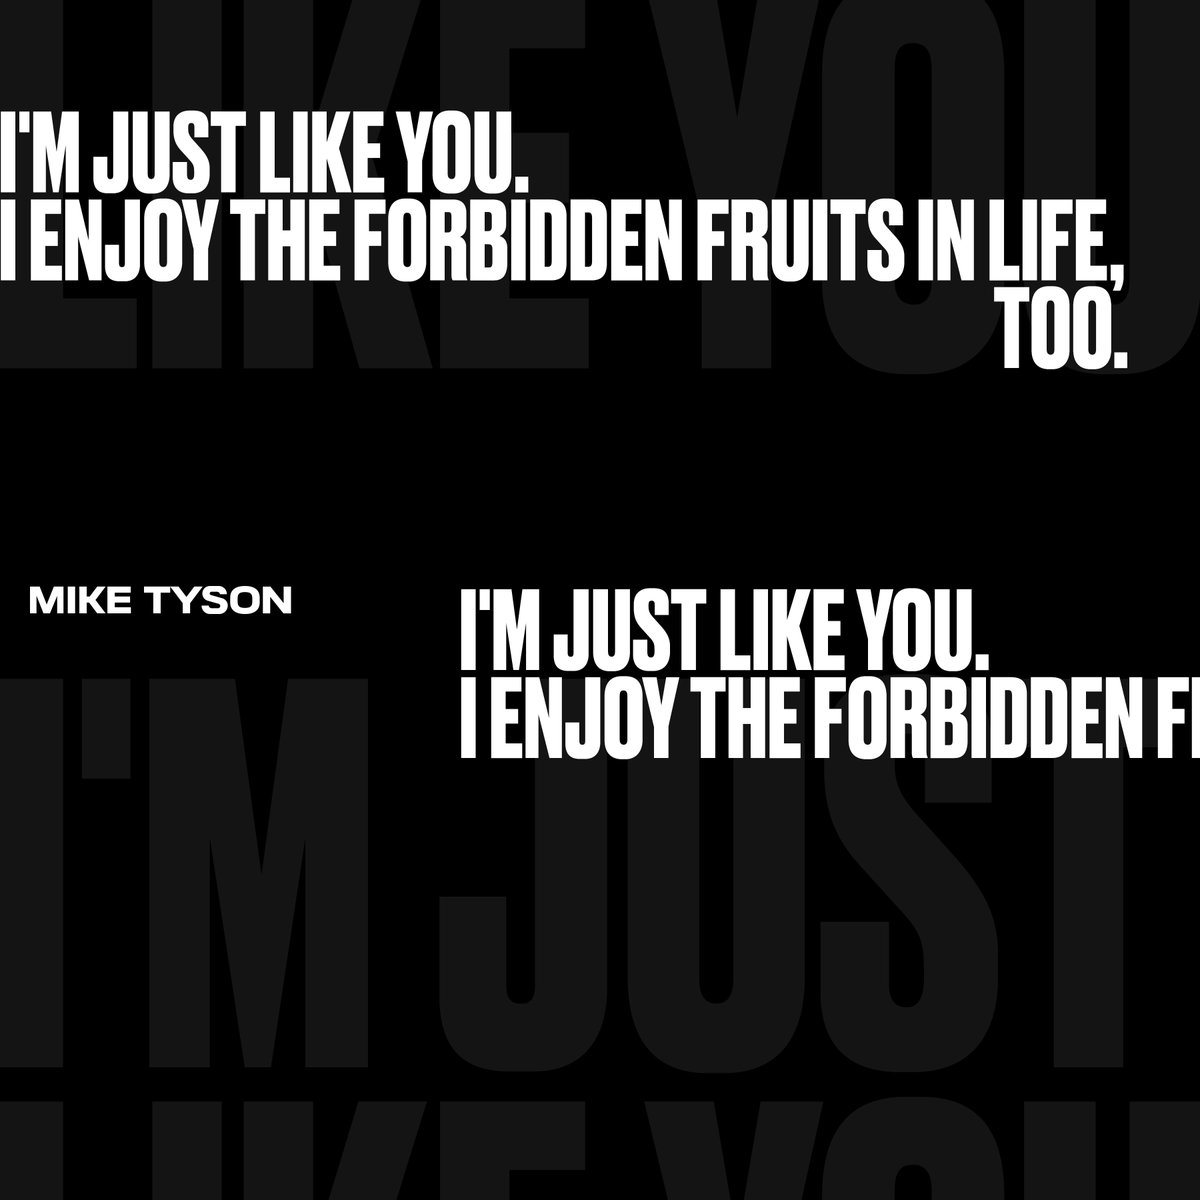 I’m just like you. I enjoy the forbidden fruits in life, too. #miketyson #vintagetyson https://t.co/3qwQJcZj86